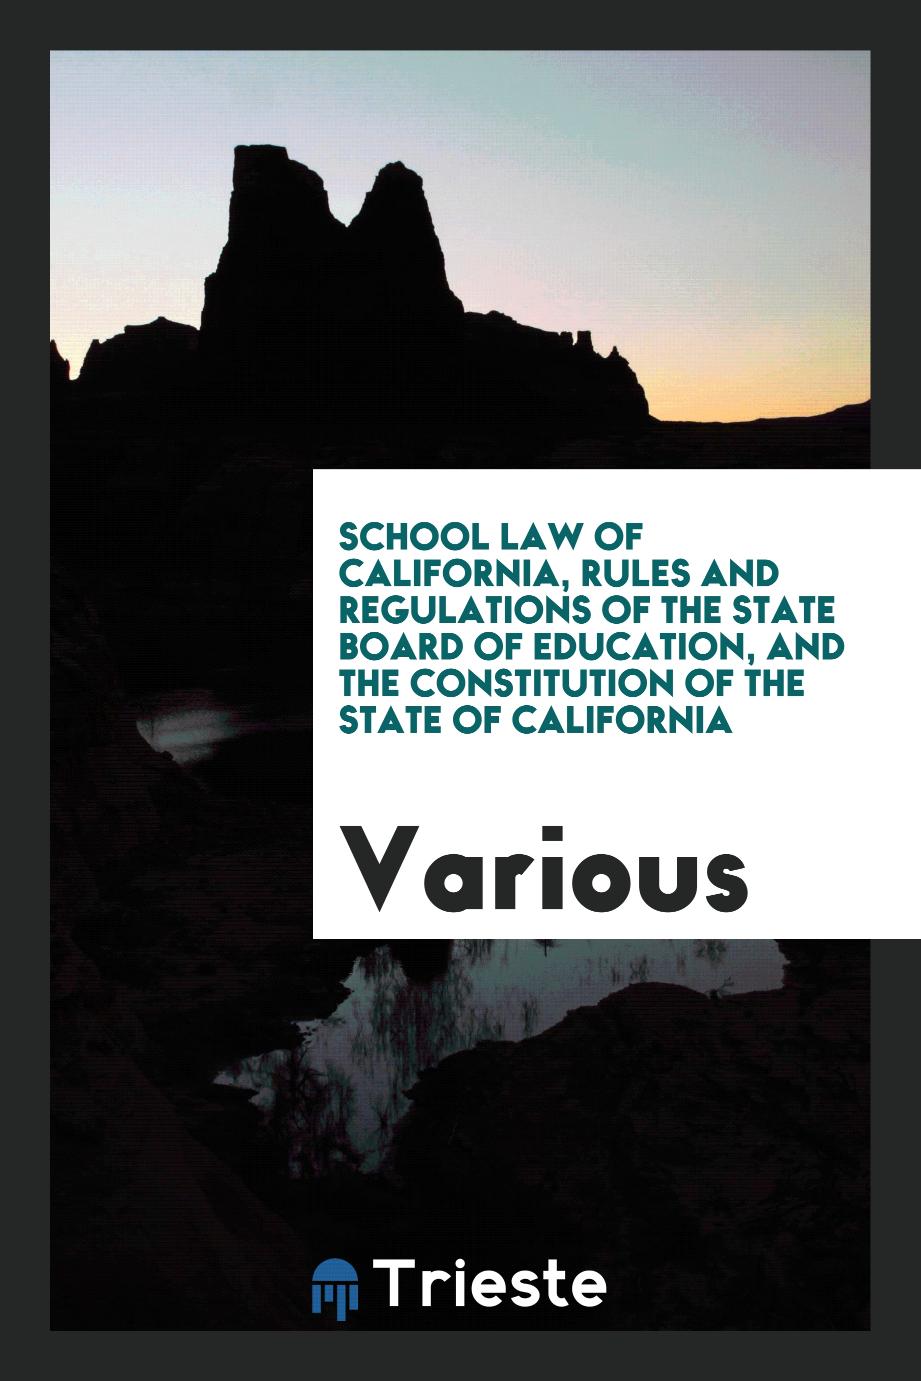 School Law of California, Rules and Regulations of the State Board of Education, and the Constitution of the State of California